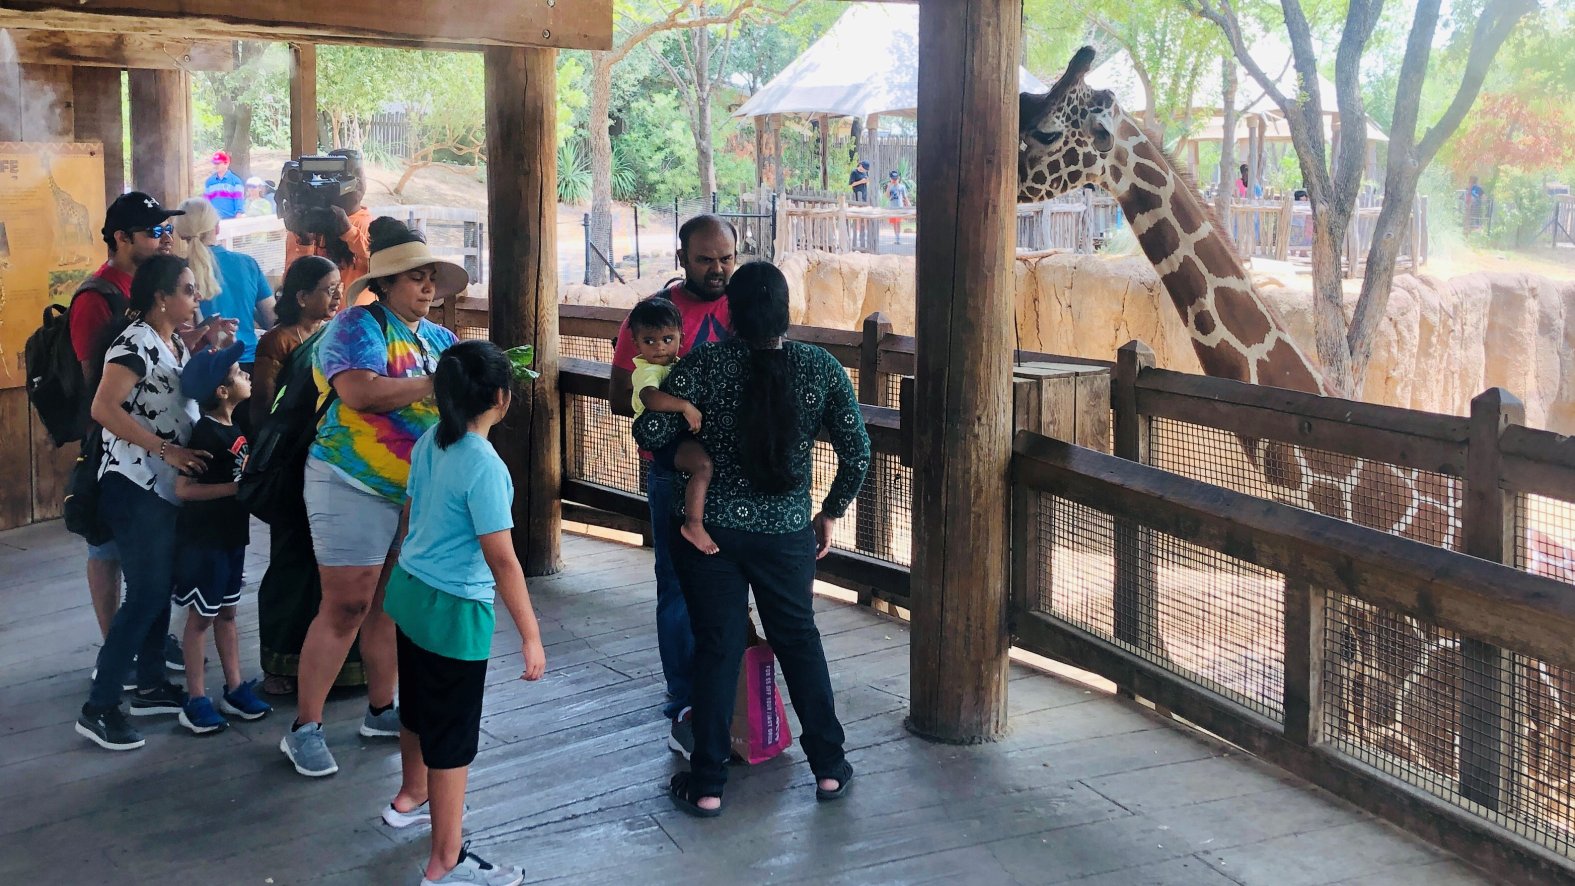 How the Dallas Zoo Kept Visitors Cool on Dollar Day NBC 5 DallasFort